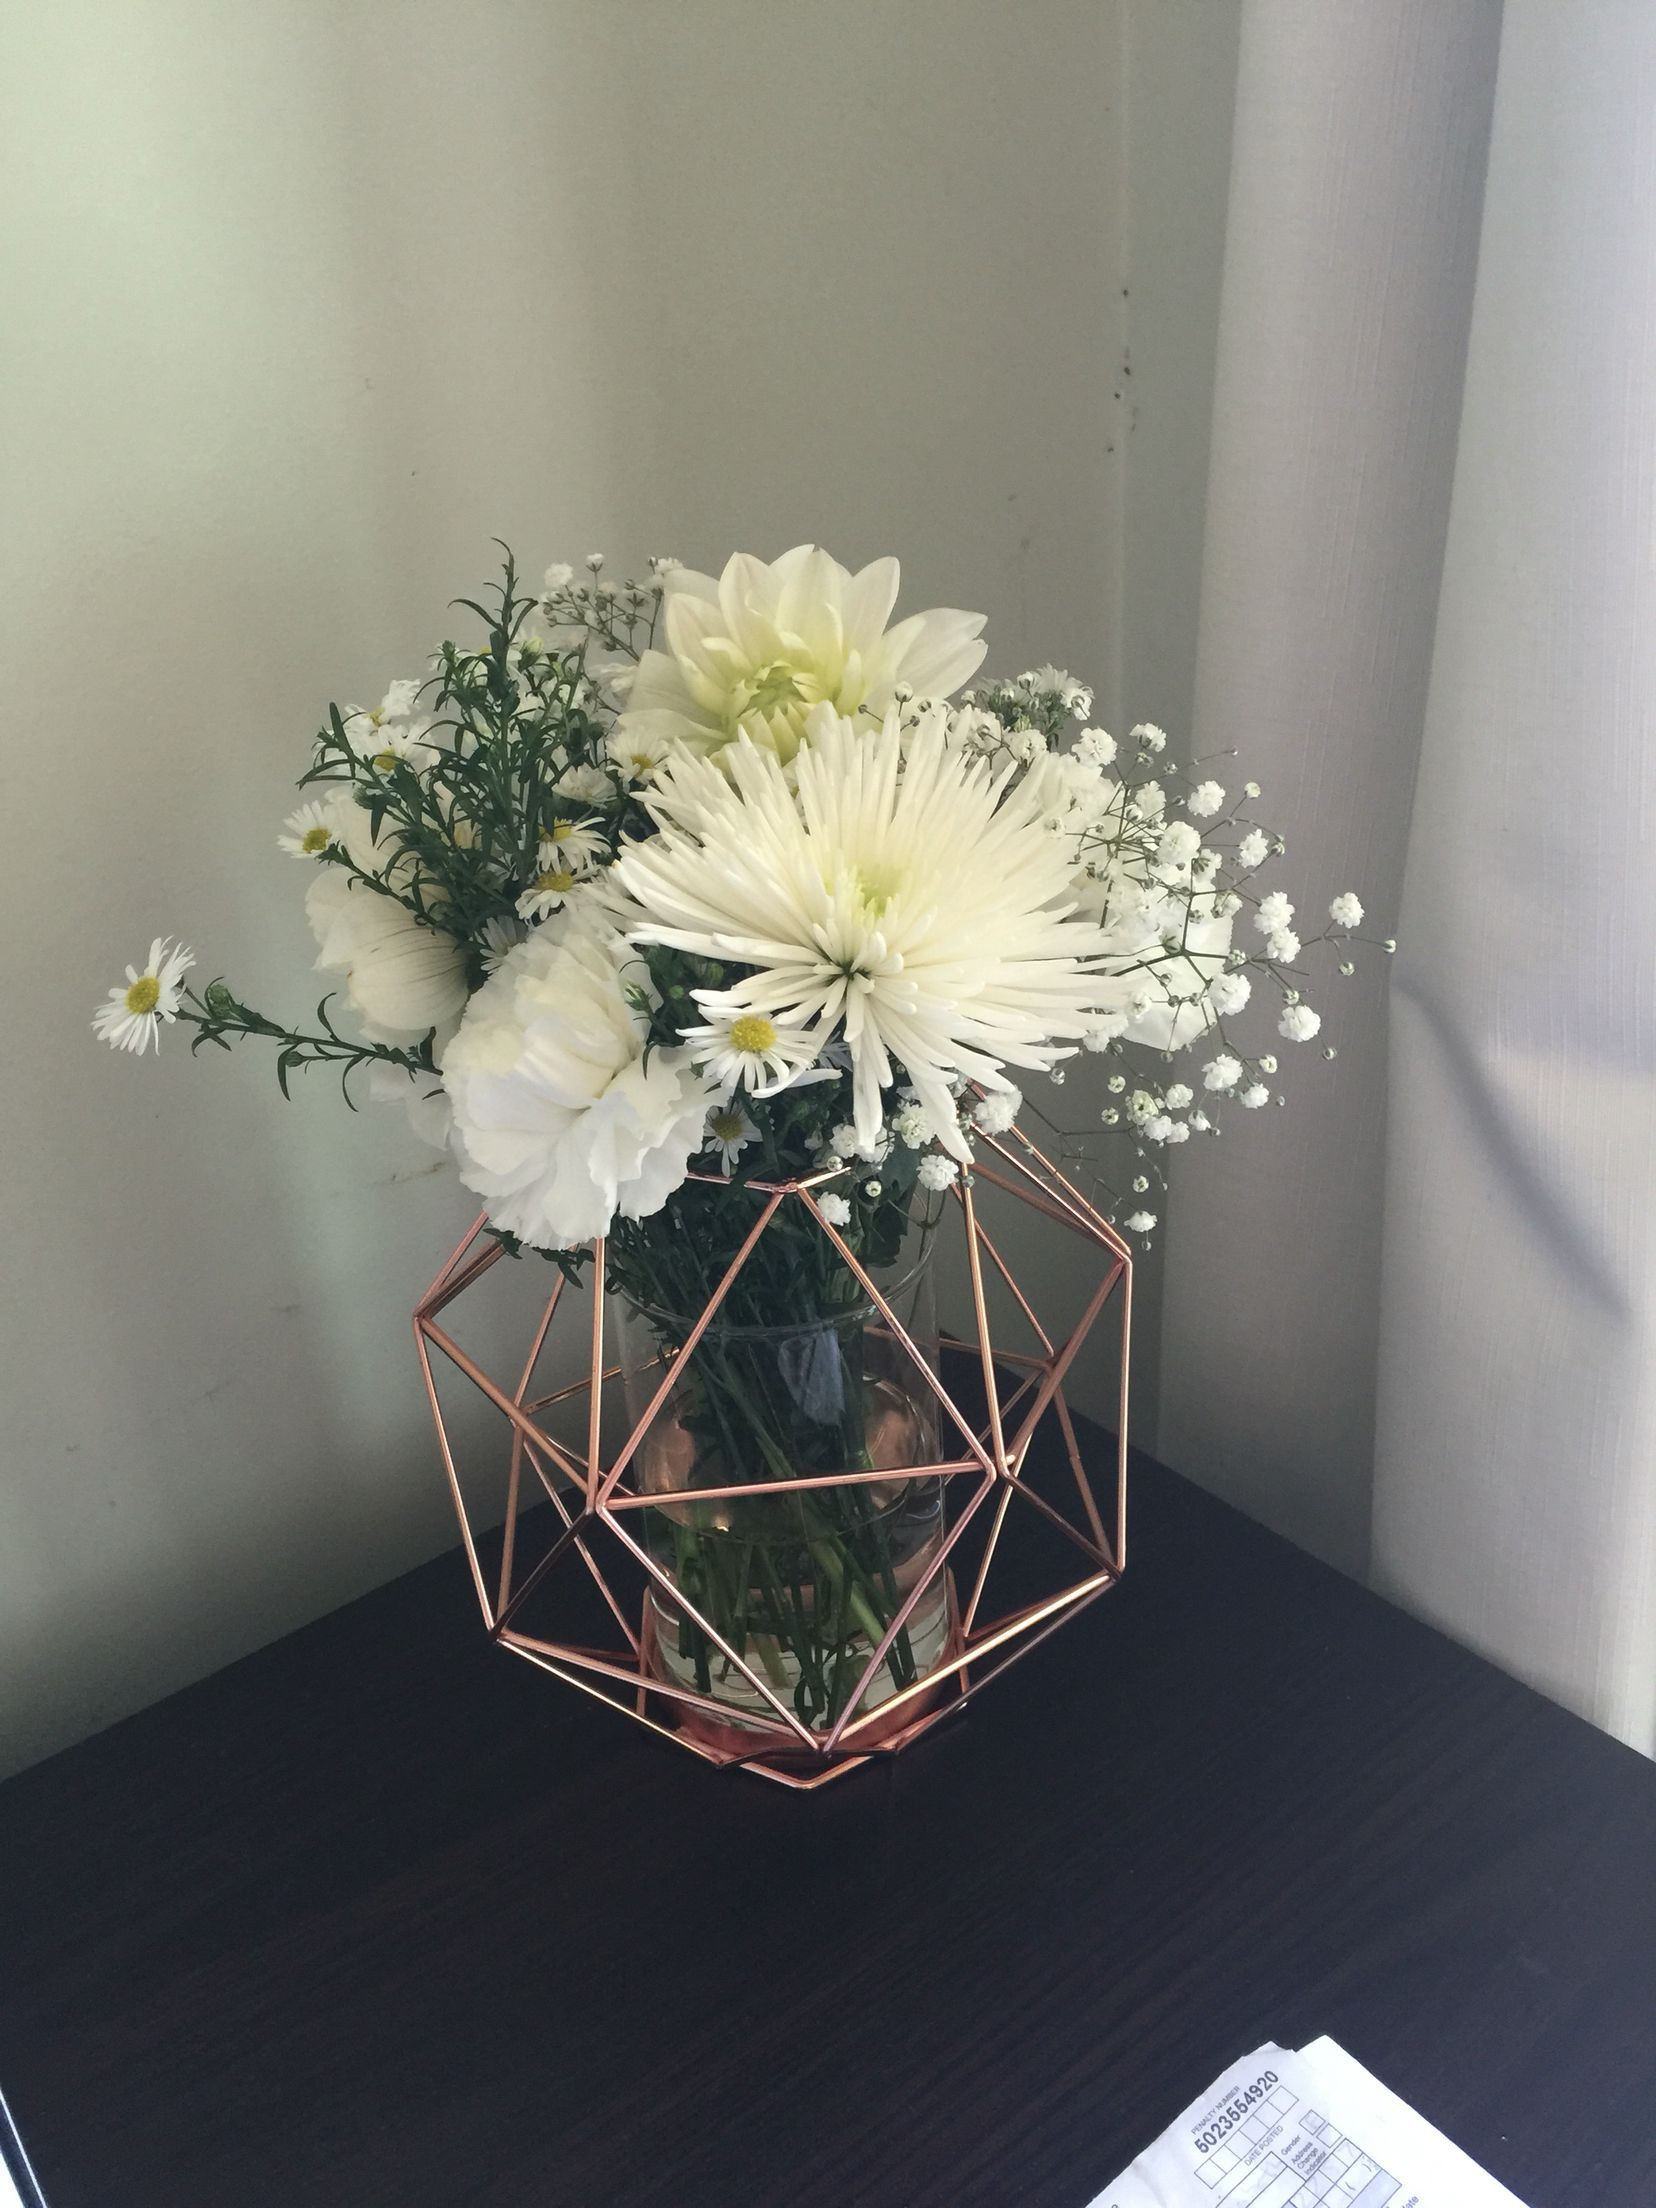 25 Awesome Gold Plated Flower Vases 2024 free download gold plated flower vases of white and gold vase elegant copper geometric candle holder from pertaining to white and gold vase elegant copper geometric candle holder from kmart used as a vase